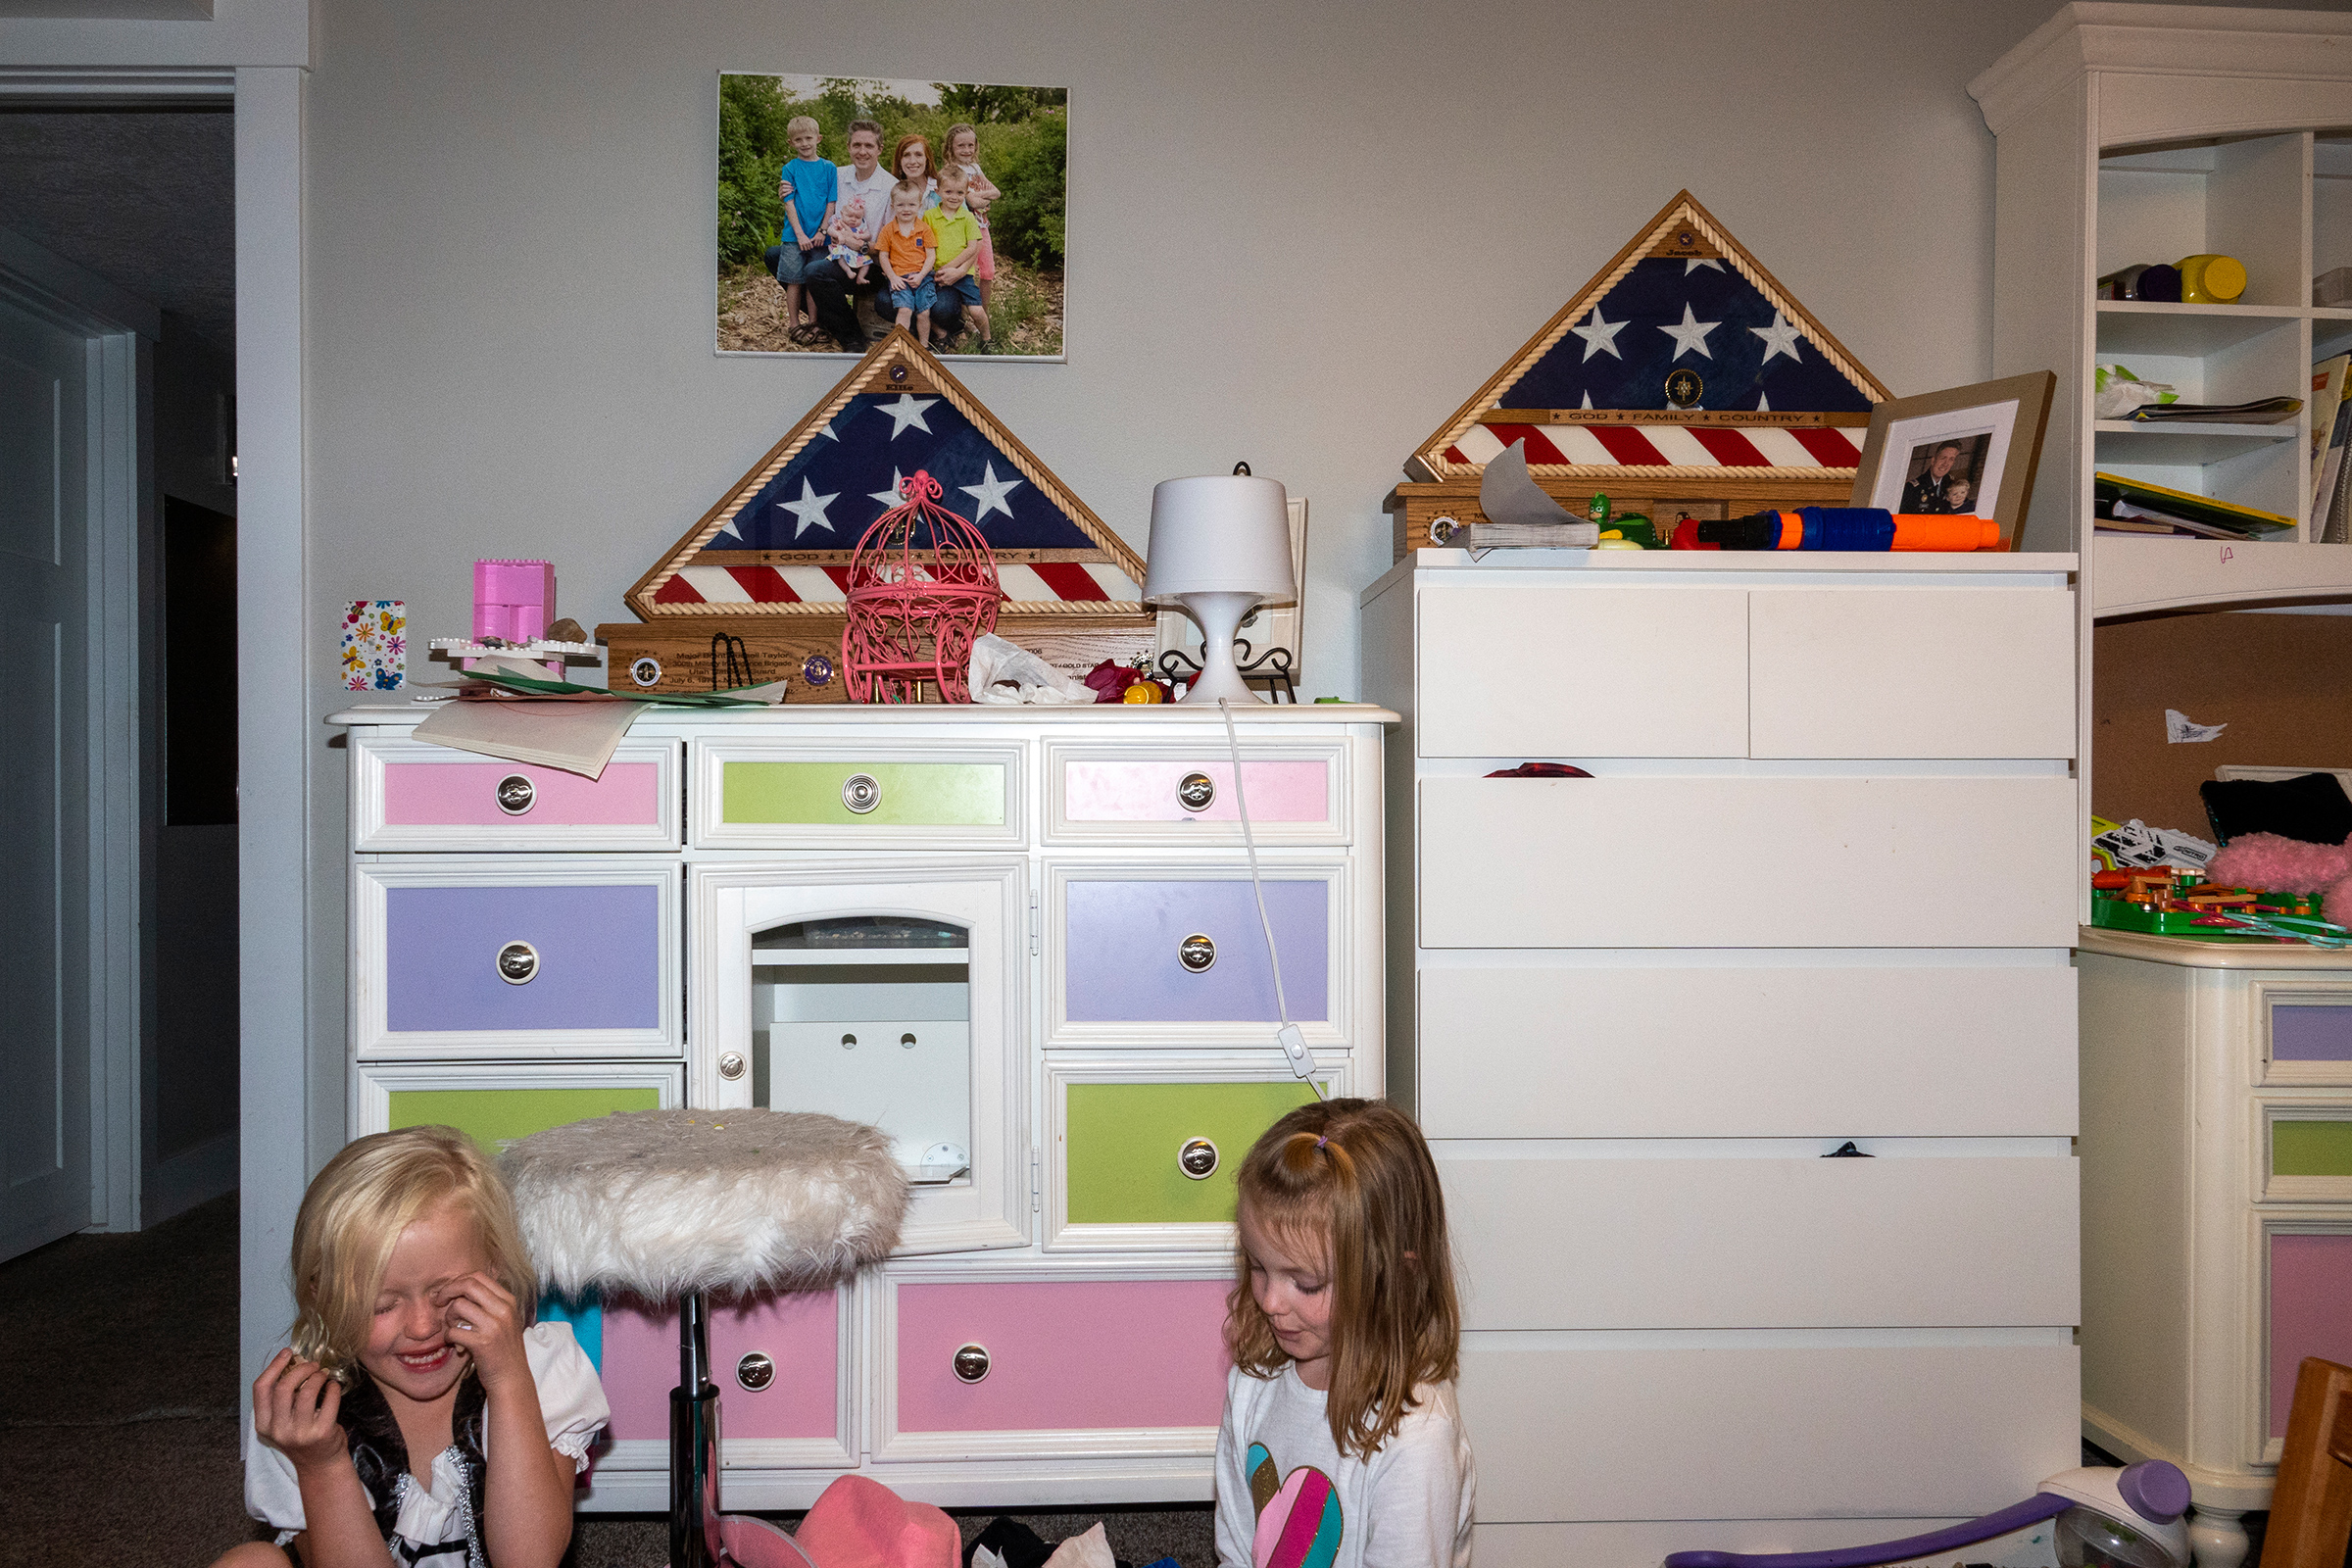 Ellie Taylor plays with cousin Vivian Pack in her bedroom. Resting on the dressers are two framed flags presented to each member of the family by the U.S. military.